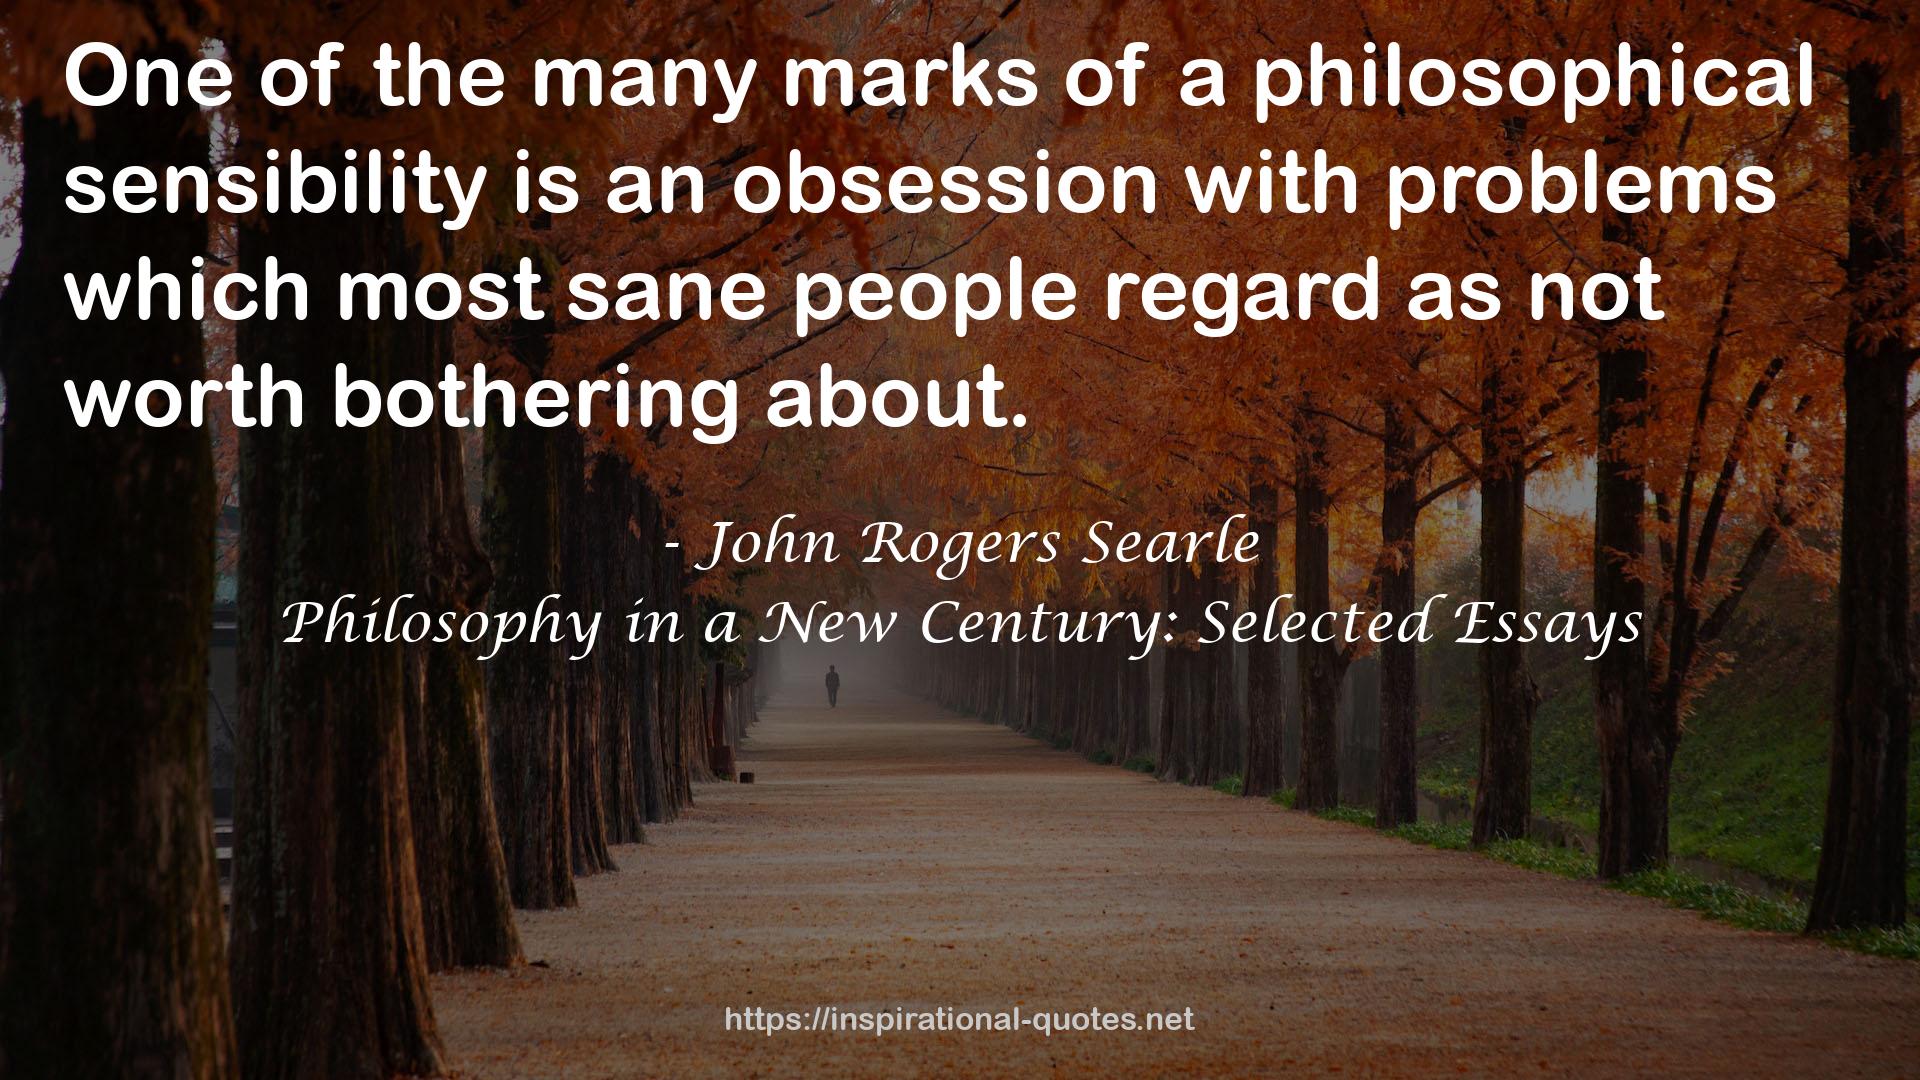 Philosophy in a New Century: Selected Essays QUOTES